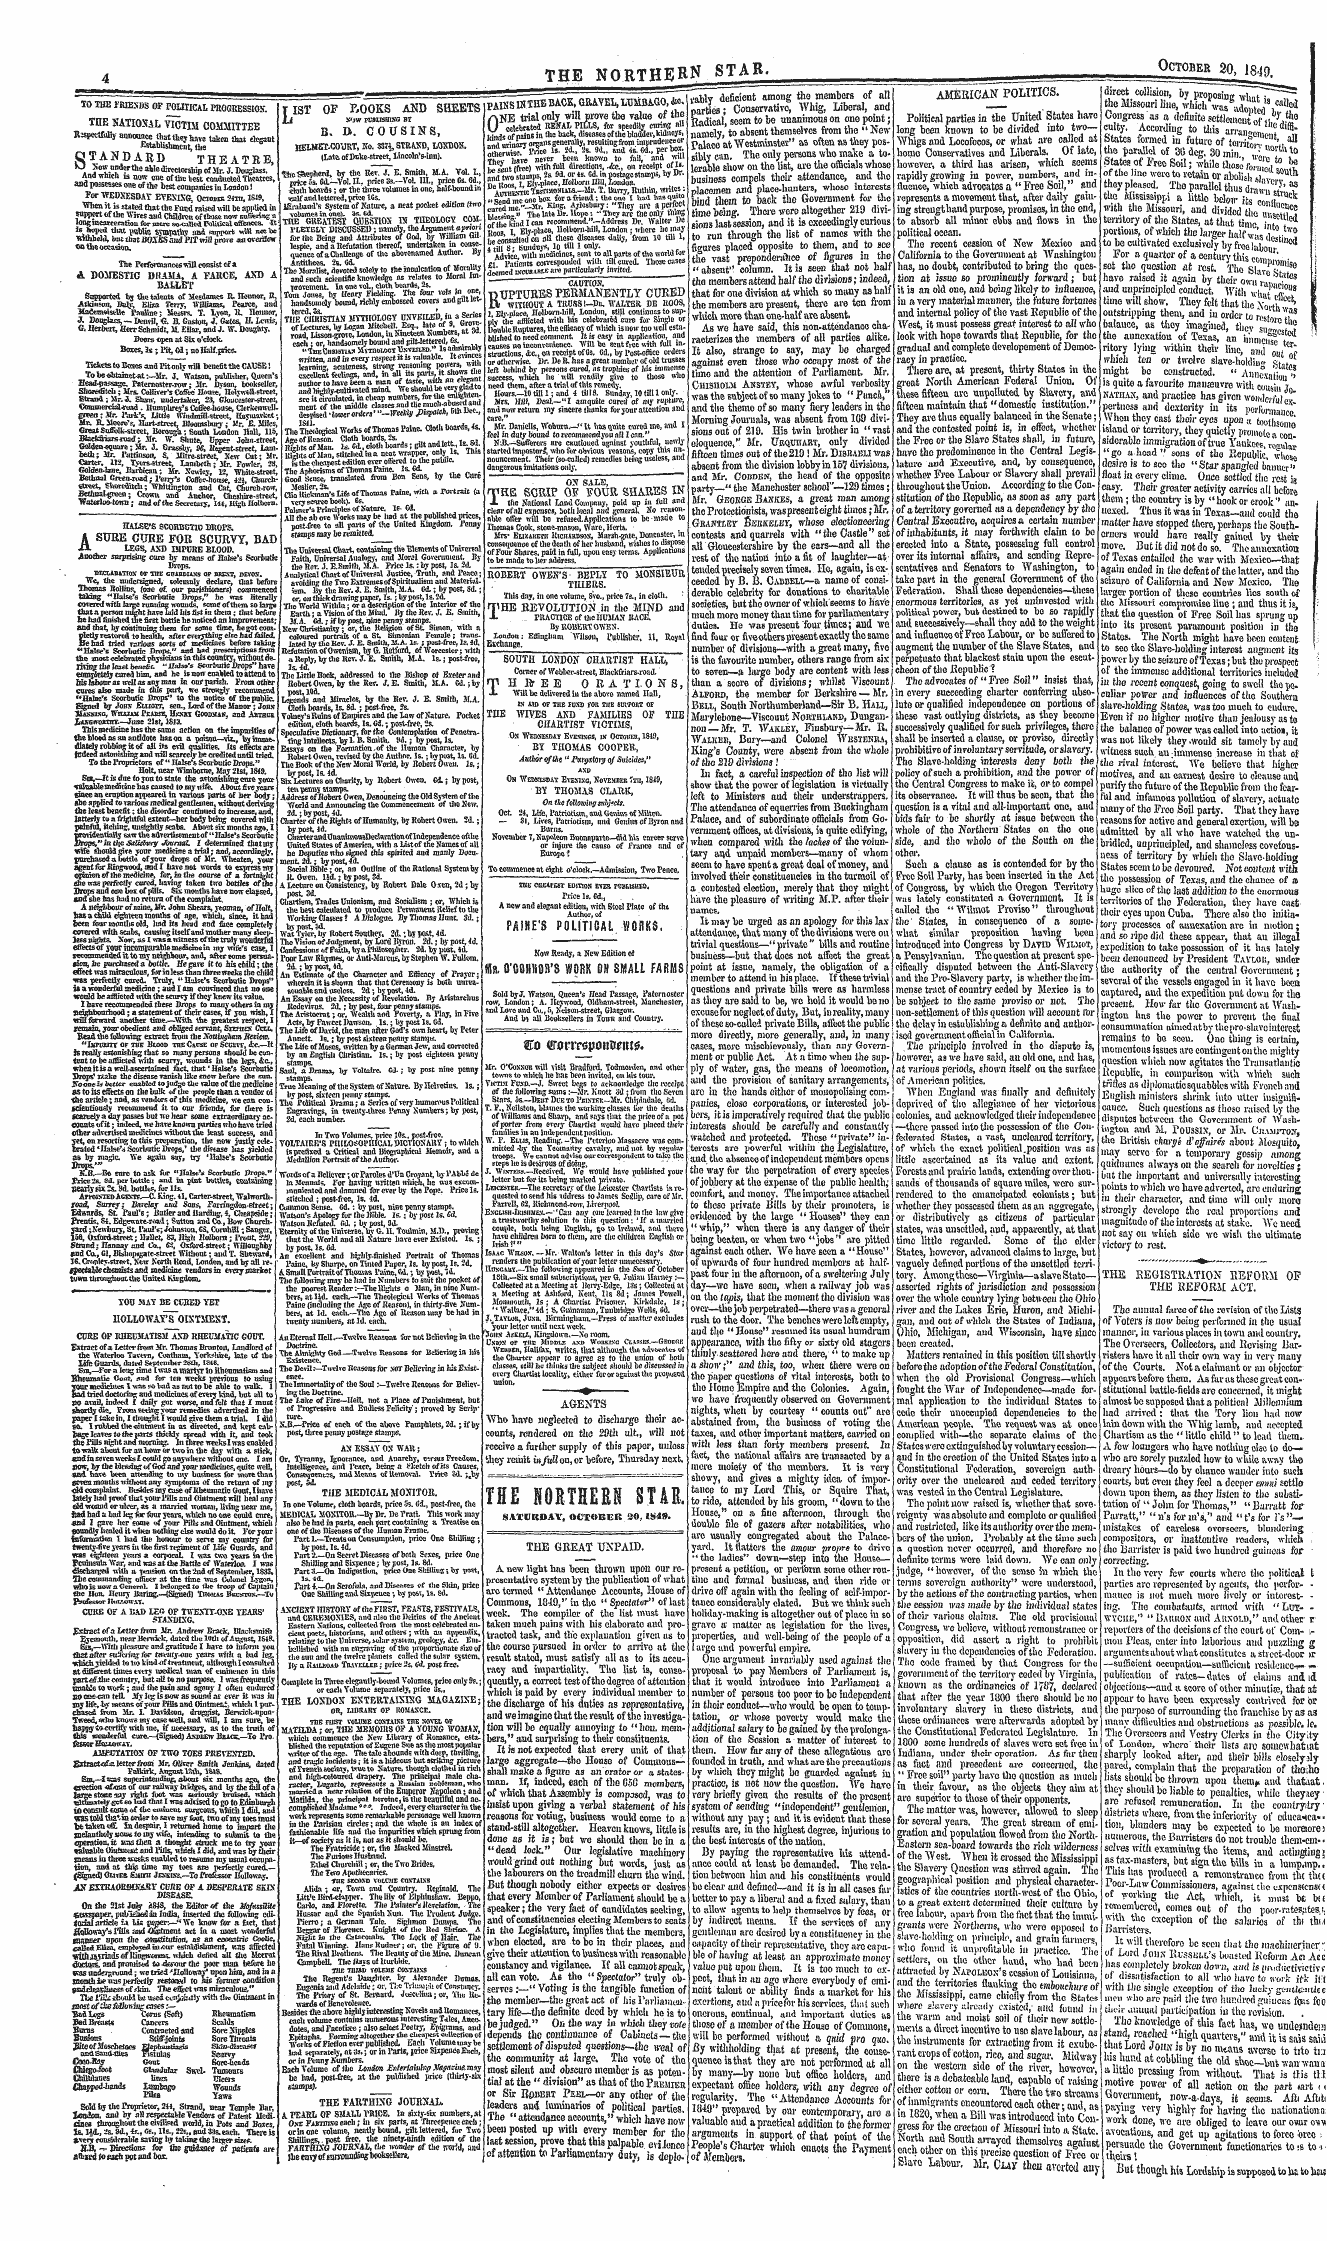 Northern Star (1837-1852): jS F Y, 2nd edition - The Northern Star. Satuuoay, October 30, Ts49.